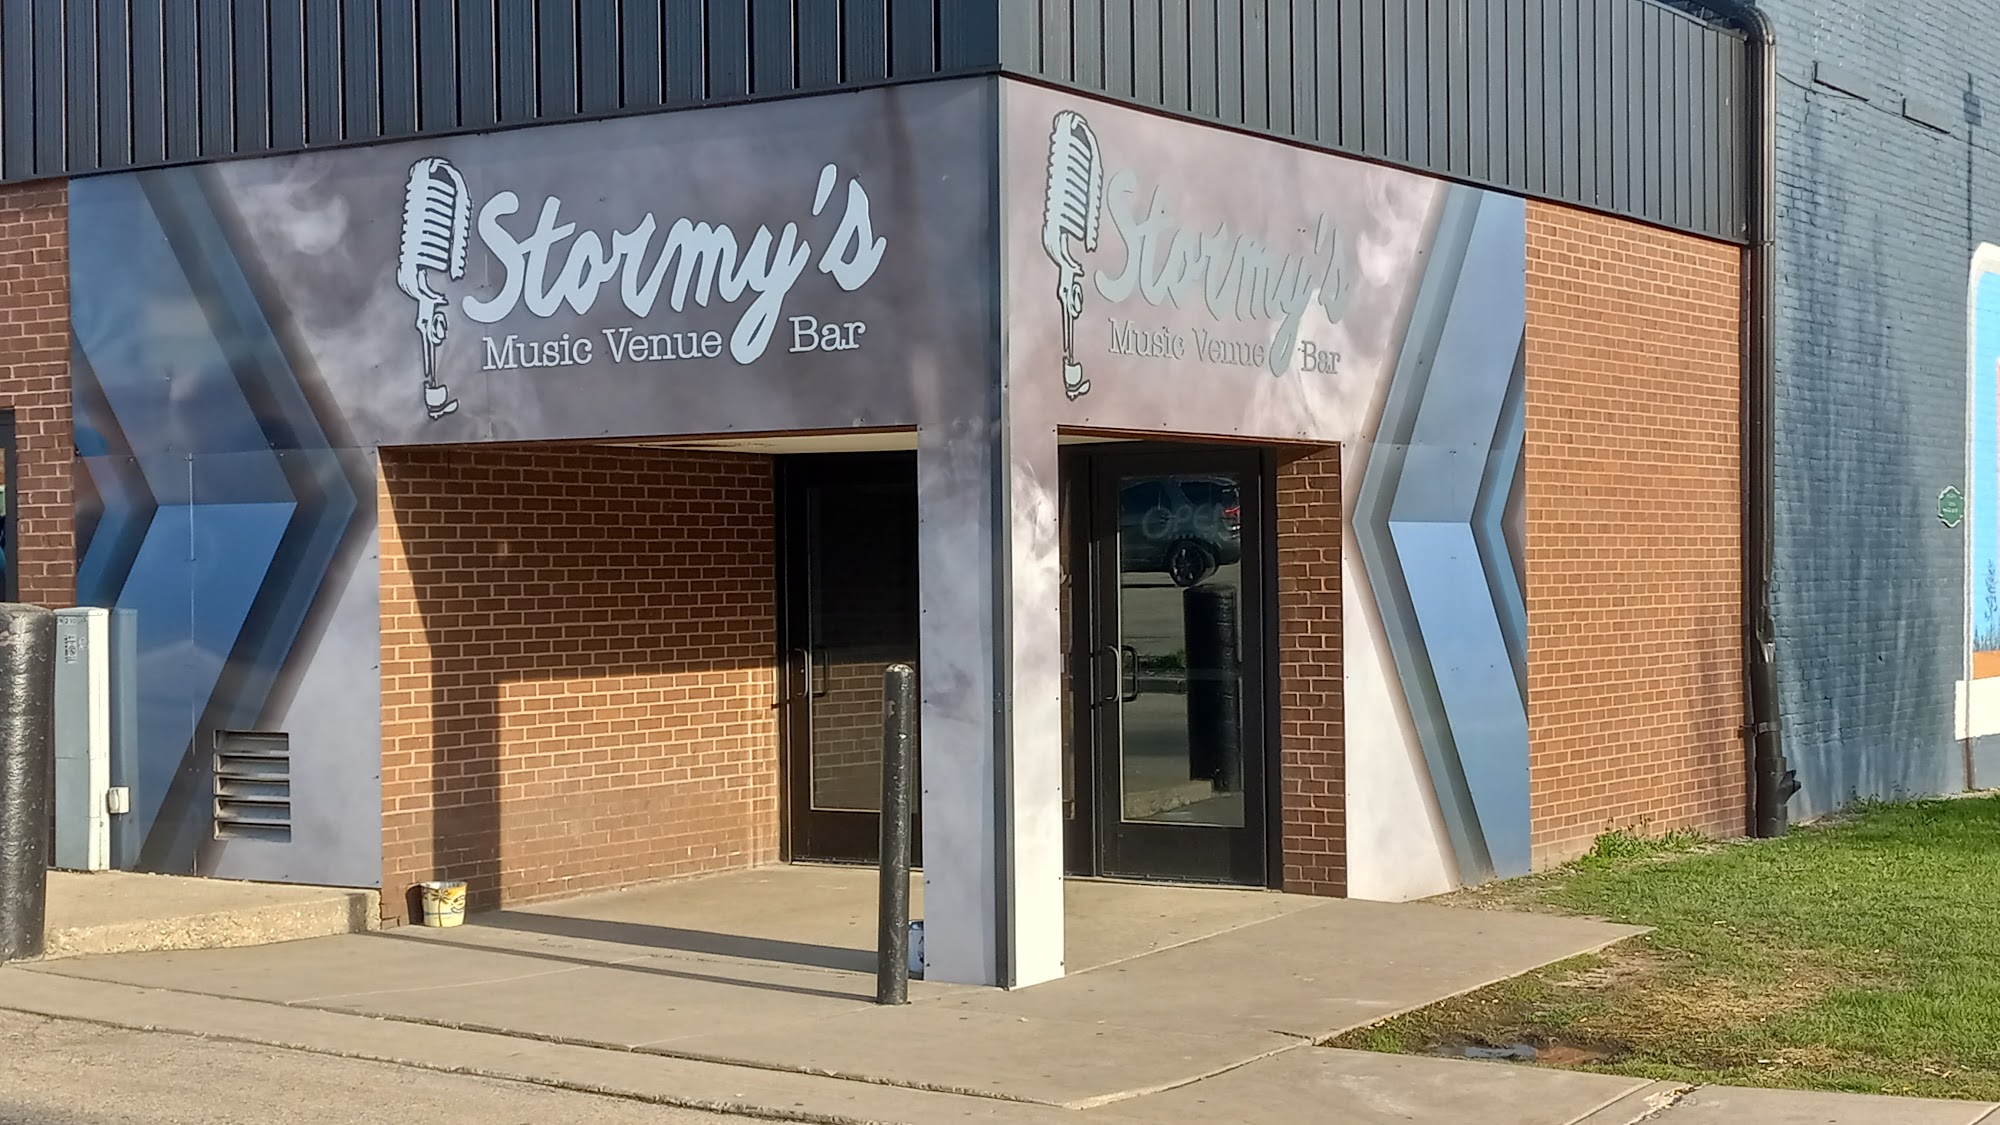 Stormy's Music Venue